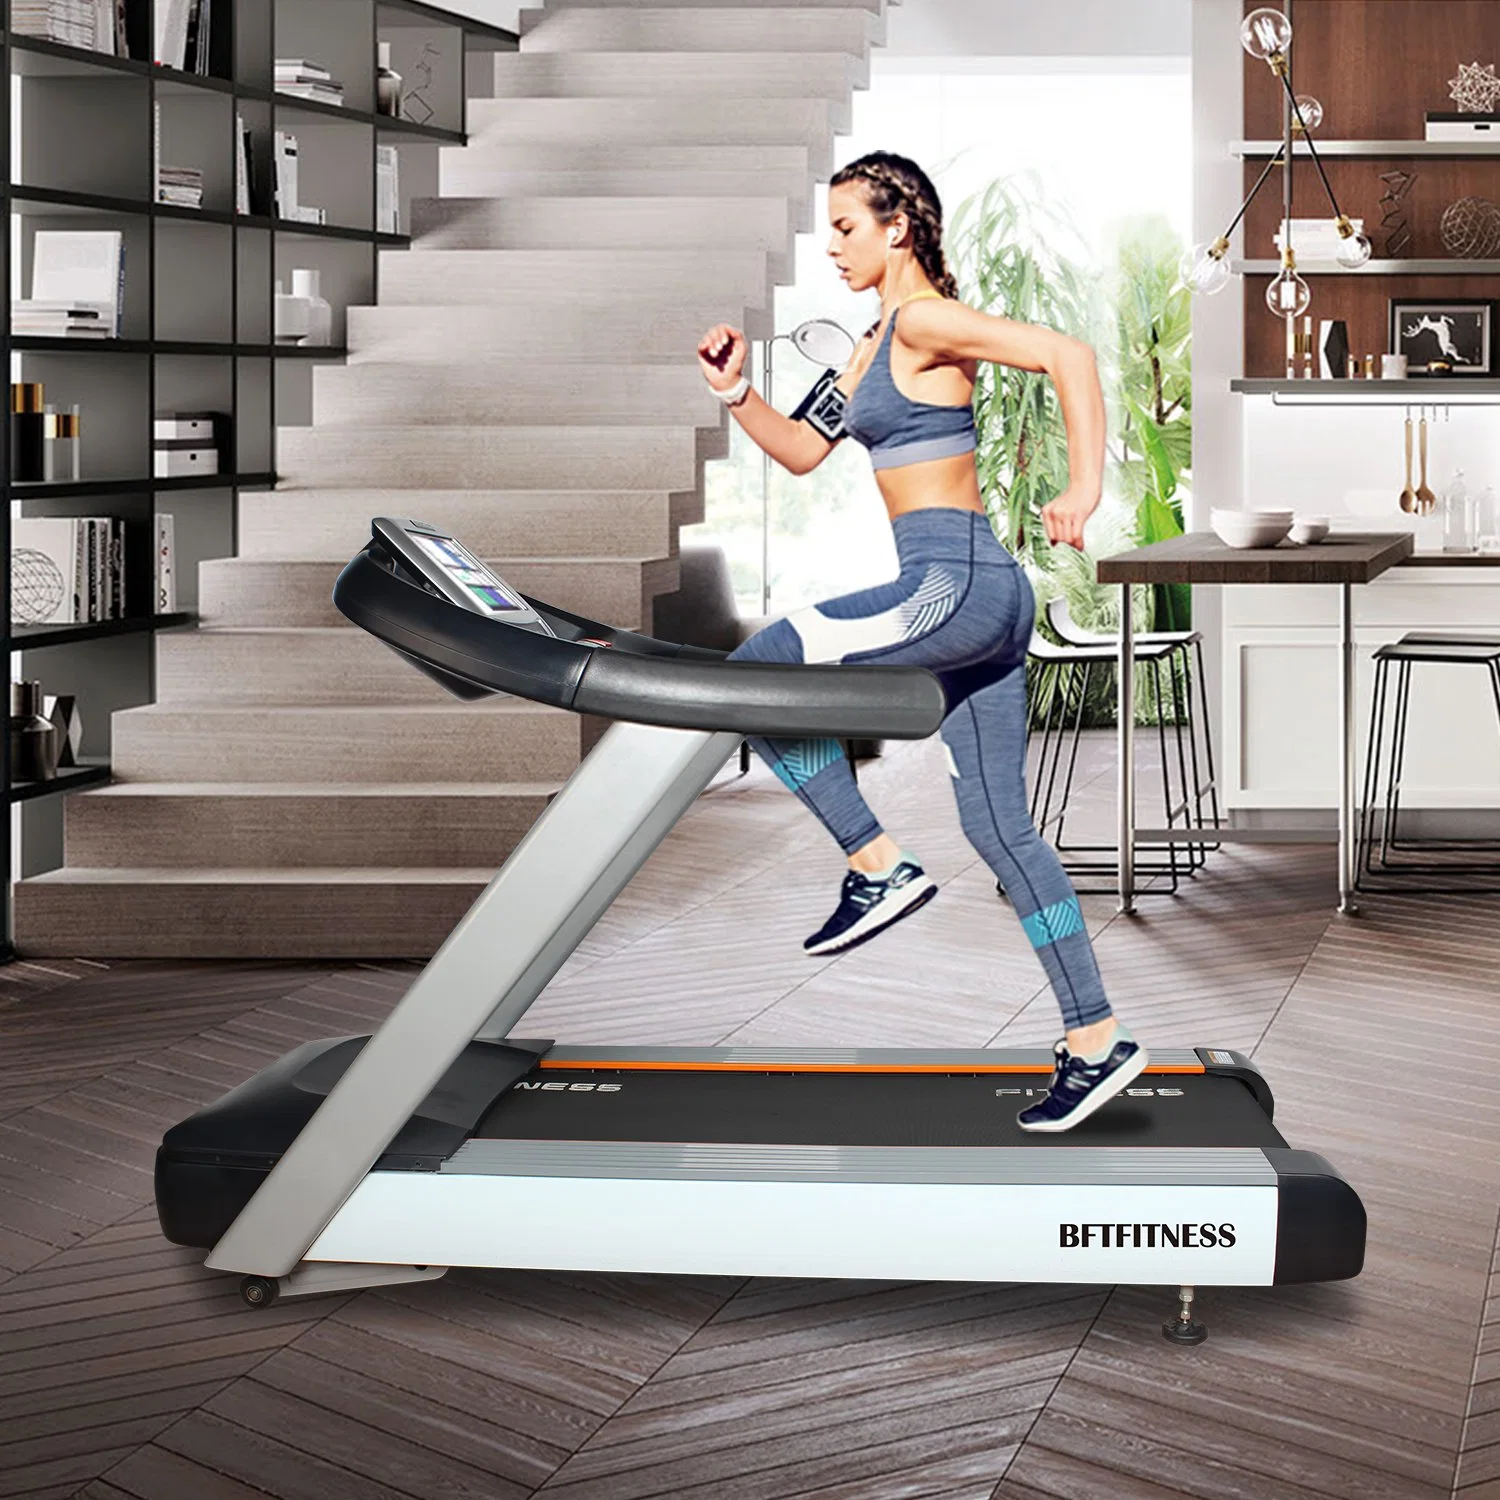 12 Programs, Electric Upgrade Electric Treadmill for Commercial and Home Running Machine